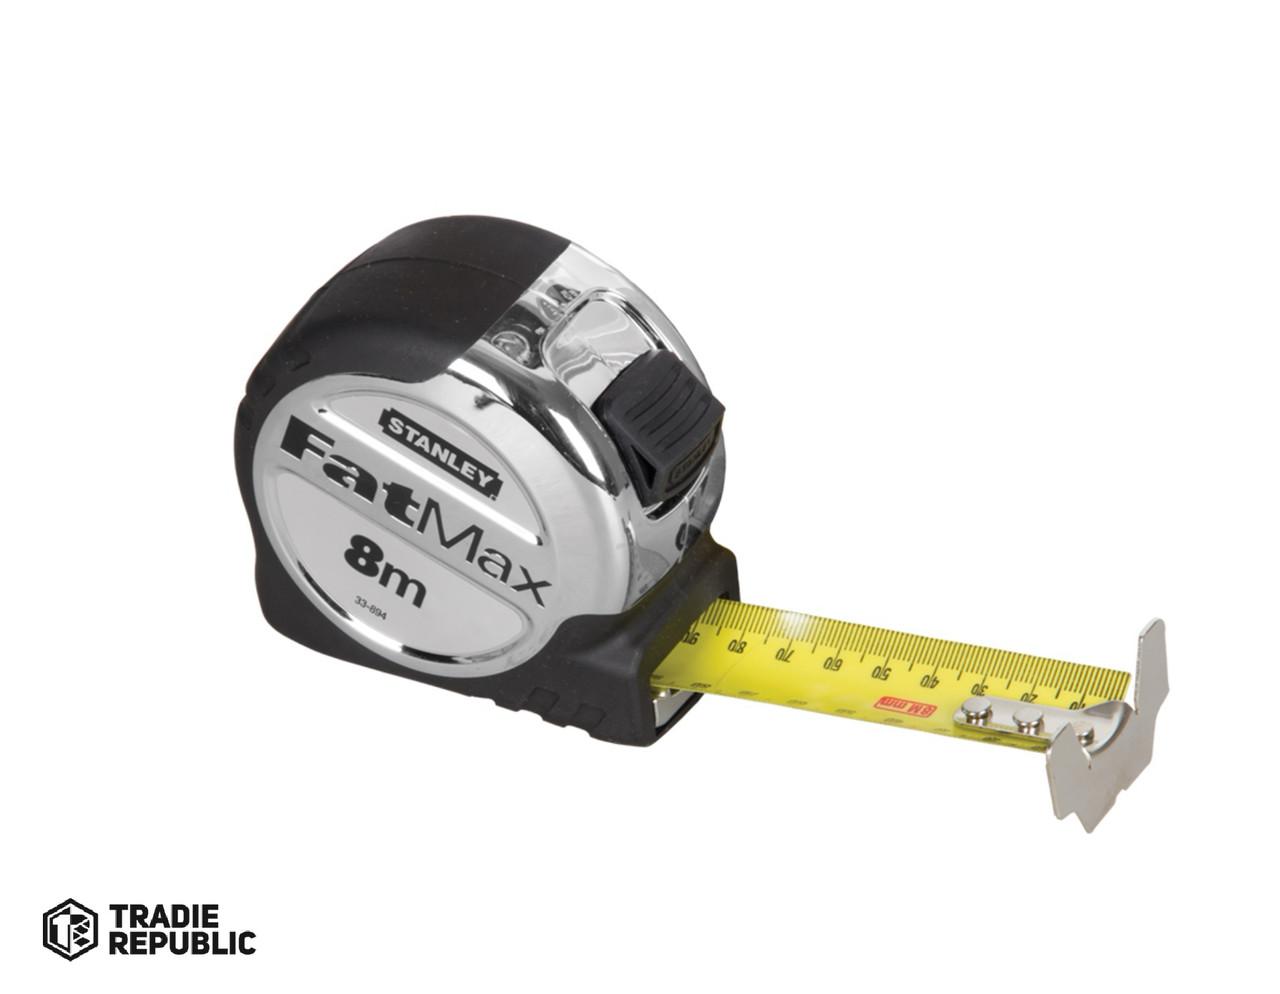 ST33-894 STANLEY 8m Fatmax Extreme Tape ST33-894